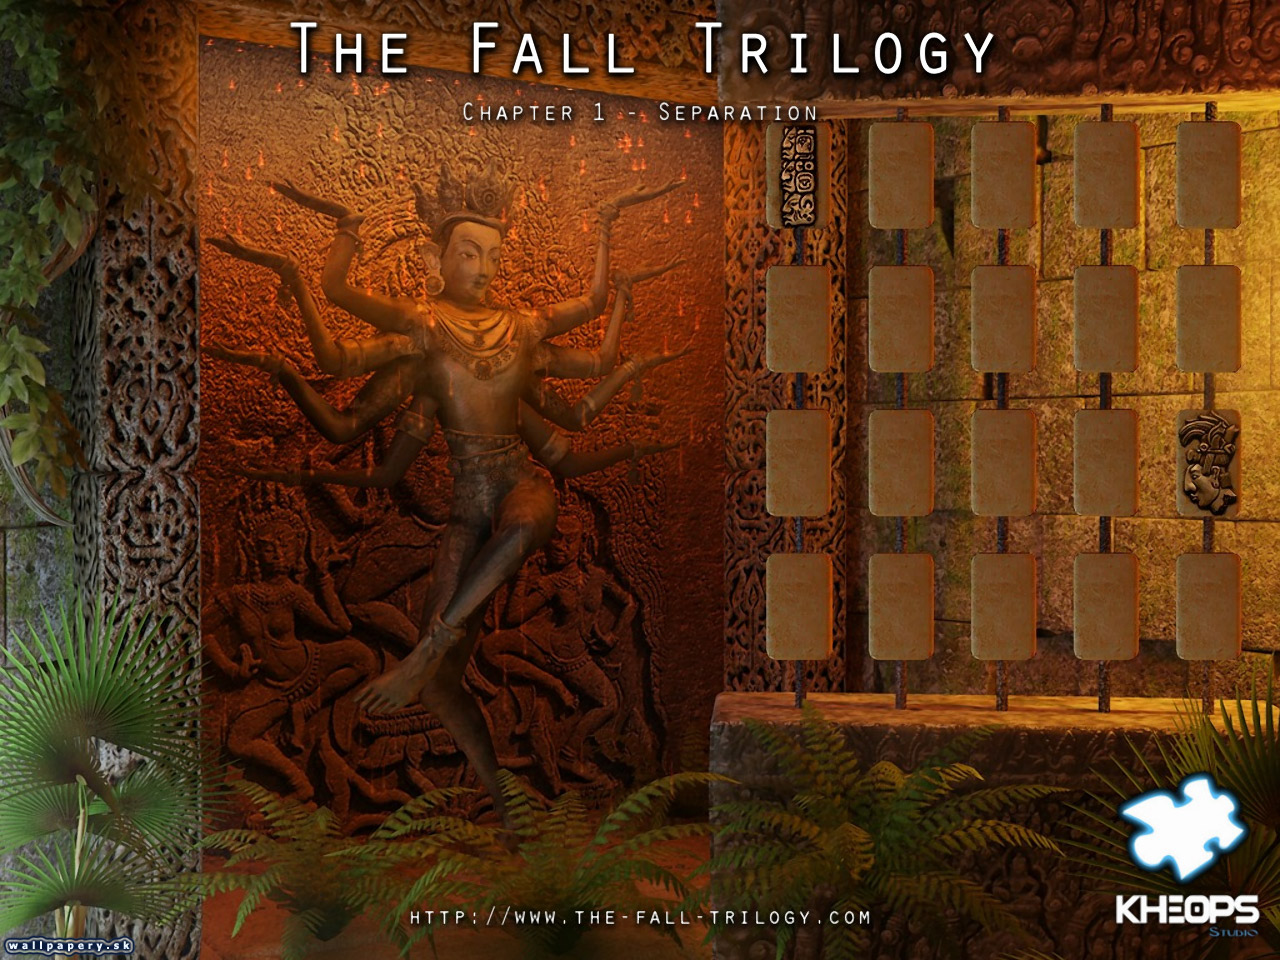 The Fall Trilogy - Chapter 1: Separation - wallpaper 13